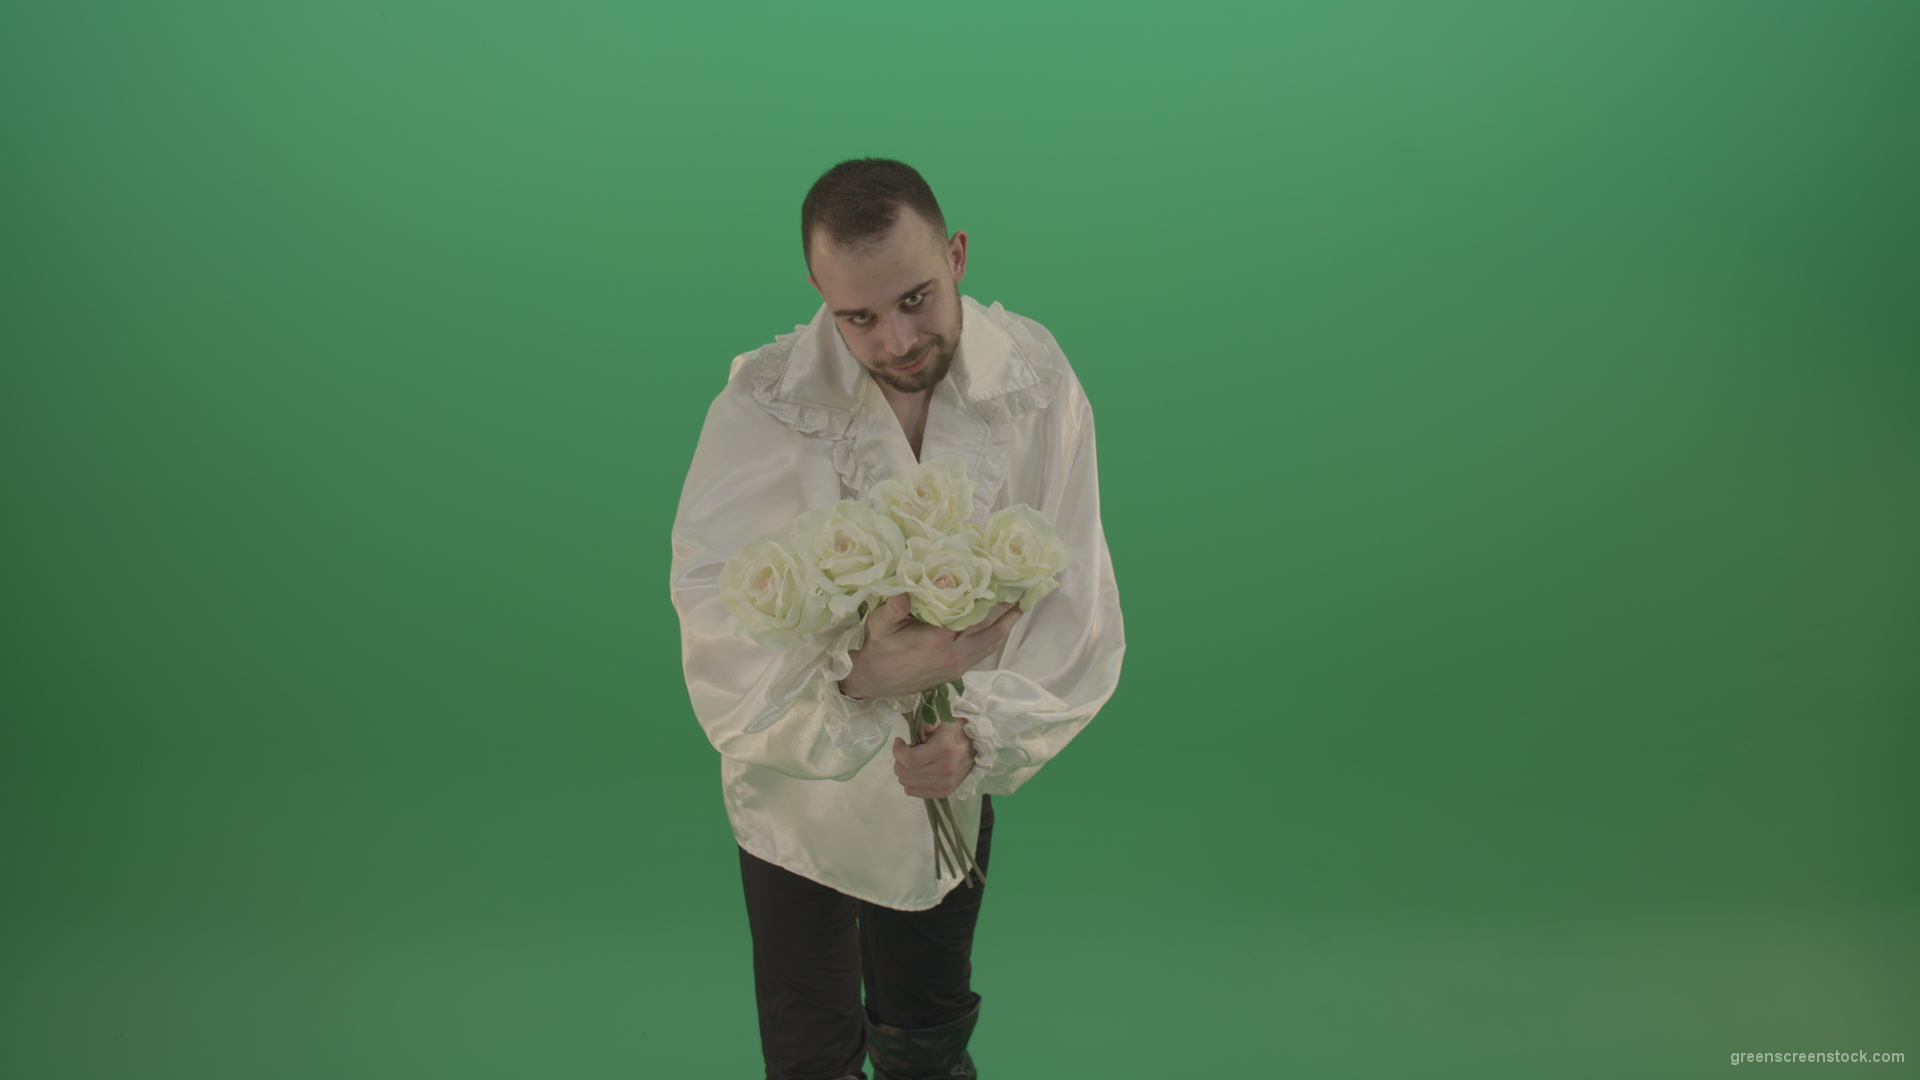 Middle-Age-theater-actor-boy-give-to-camera-White-flowers-isolated-on-green-background_008 Green Screen Stock